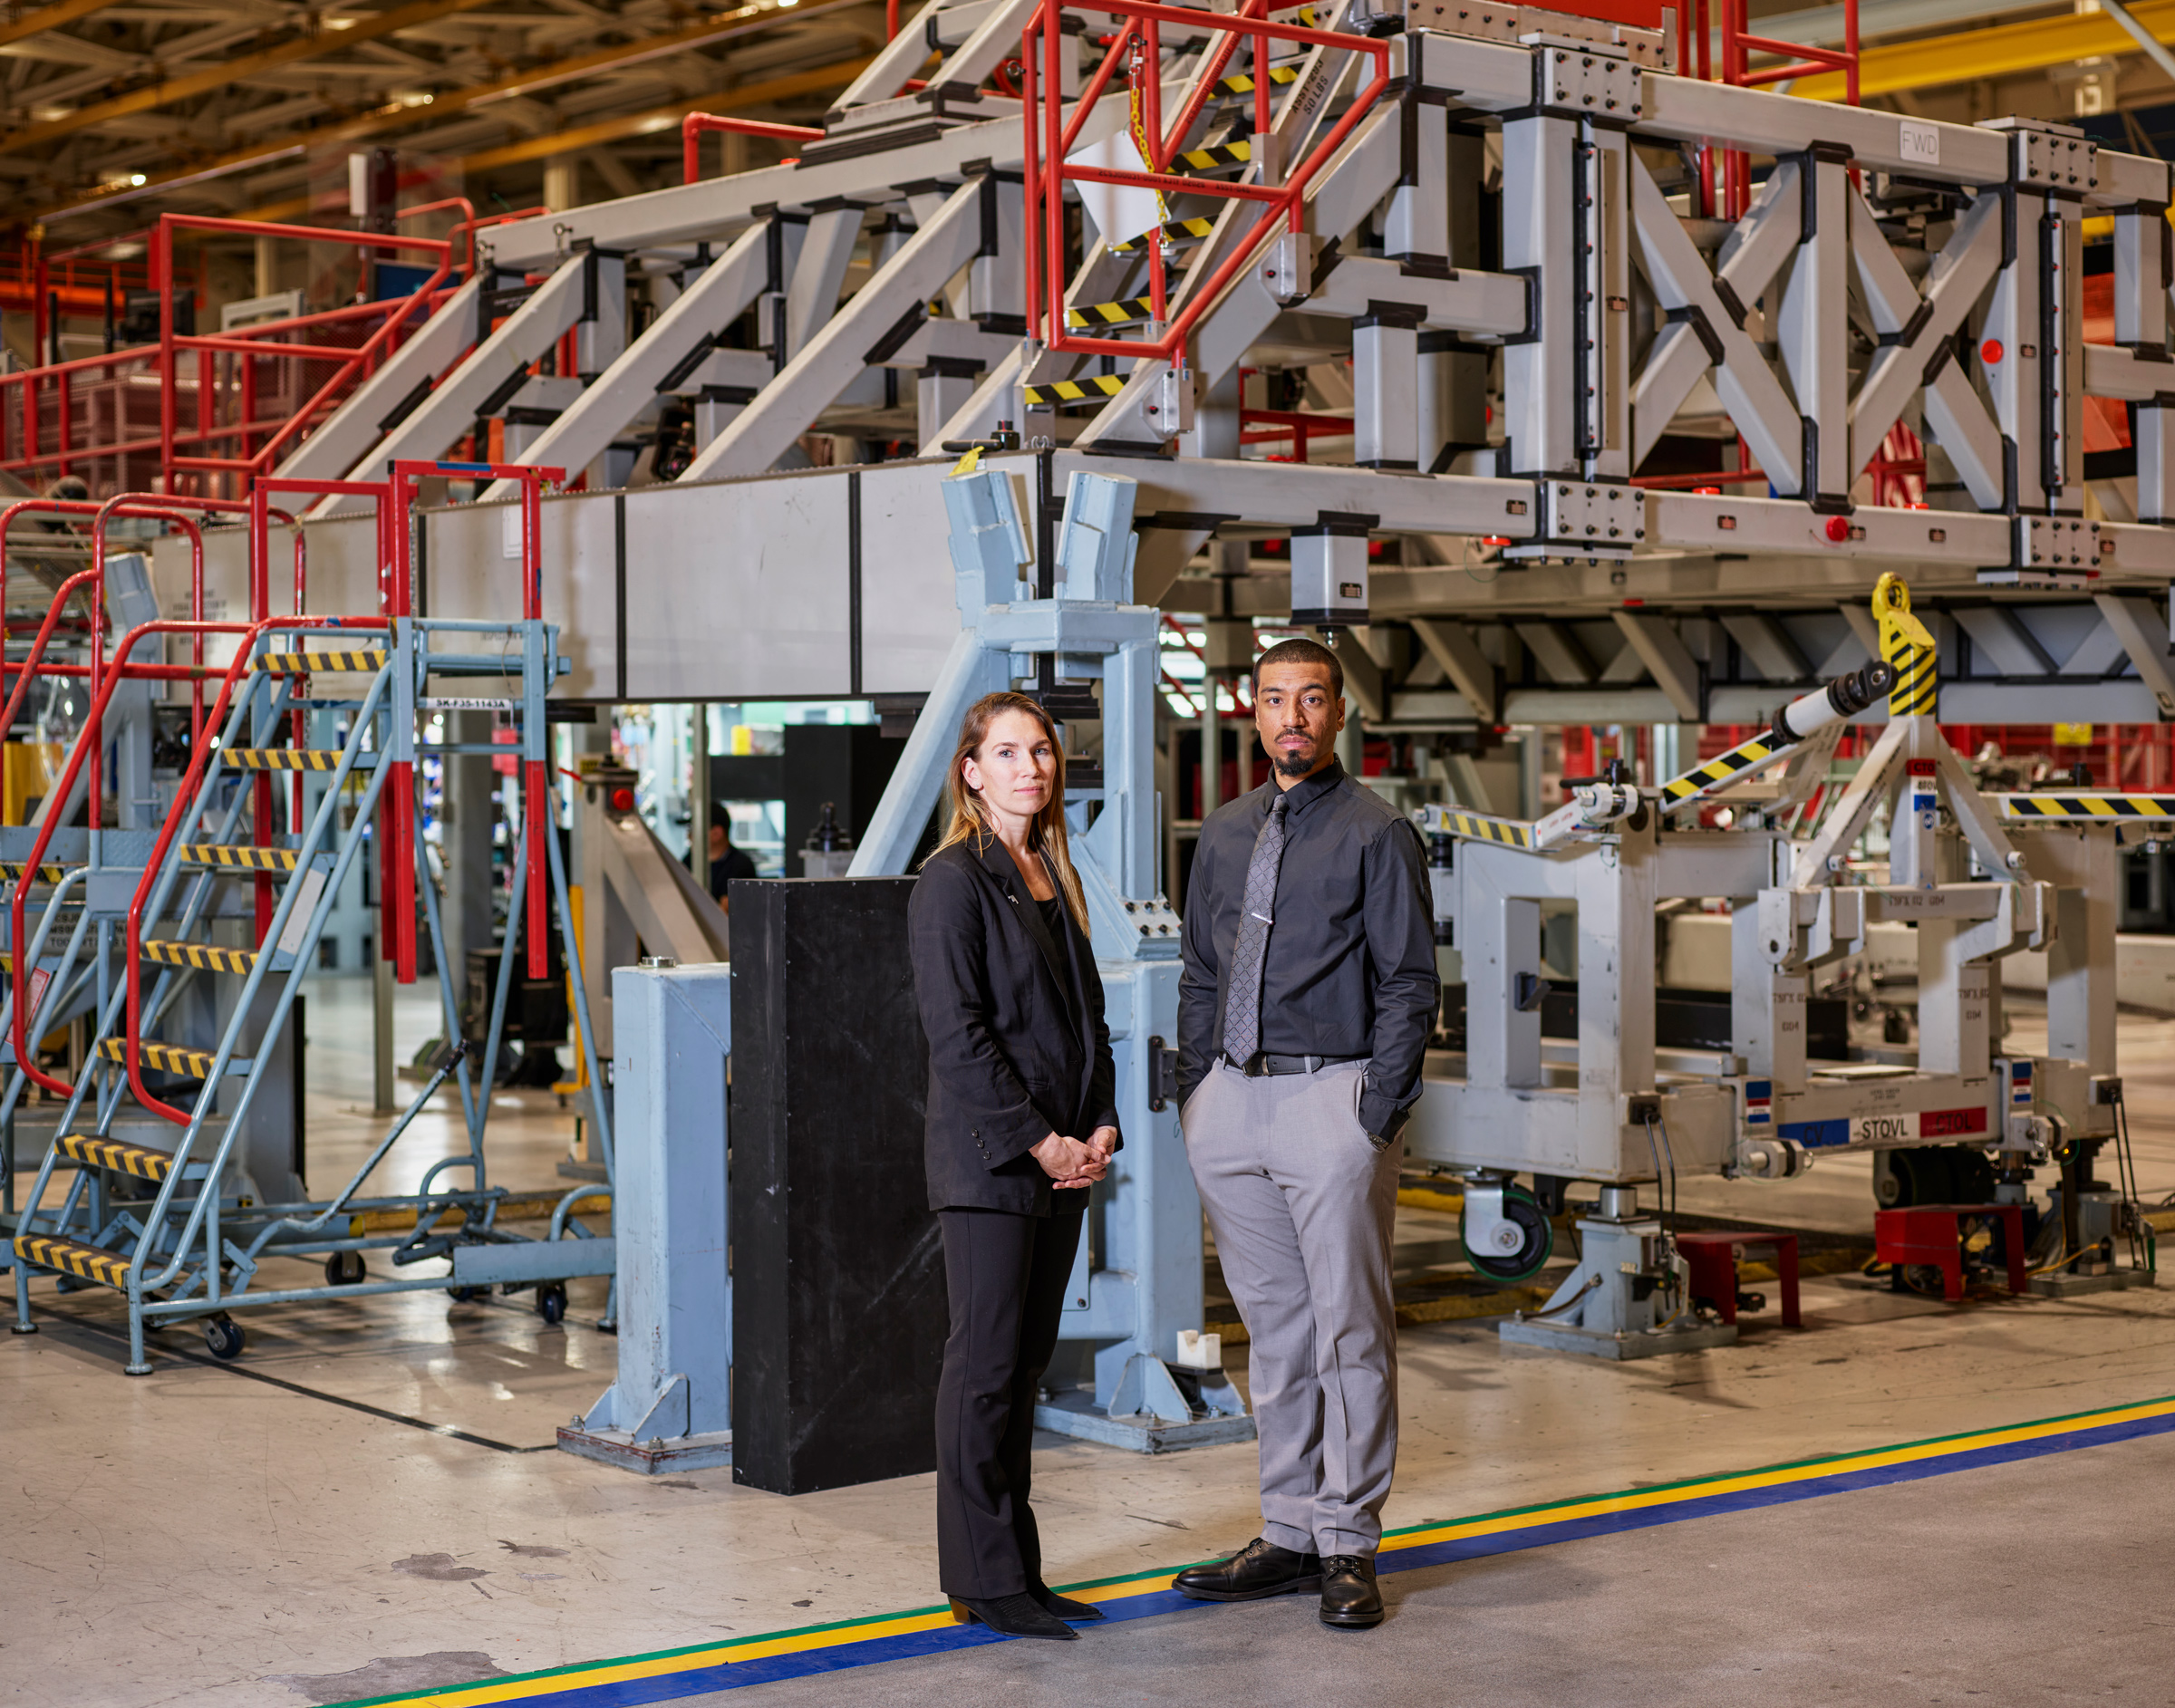 Jessi Ross, a program director, and Hassan Charles, a surface technician, are among 5,000 employees at Northrop Grumman now working on the B-21 bomber. (Christopher Payne for TIME | A small portion of this image was removed for security purposes.)